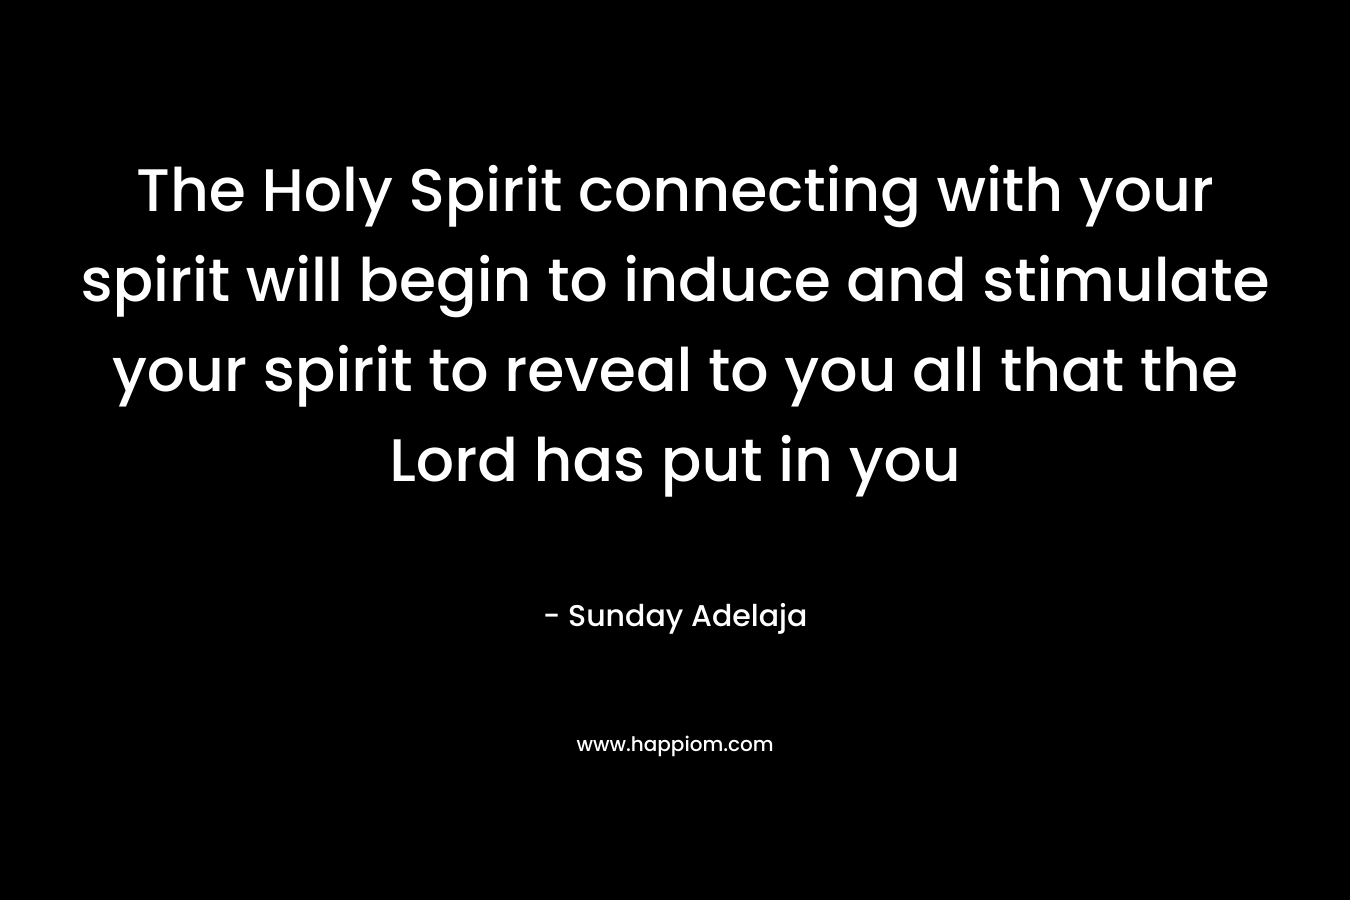 The Holy Spirit connecting with your spirit will begin to induce and stimulate your spirit to reveal to you all that the Lord has put in you